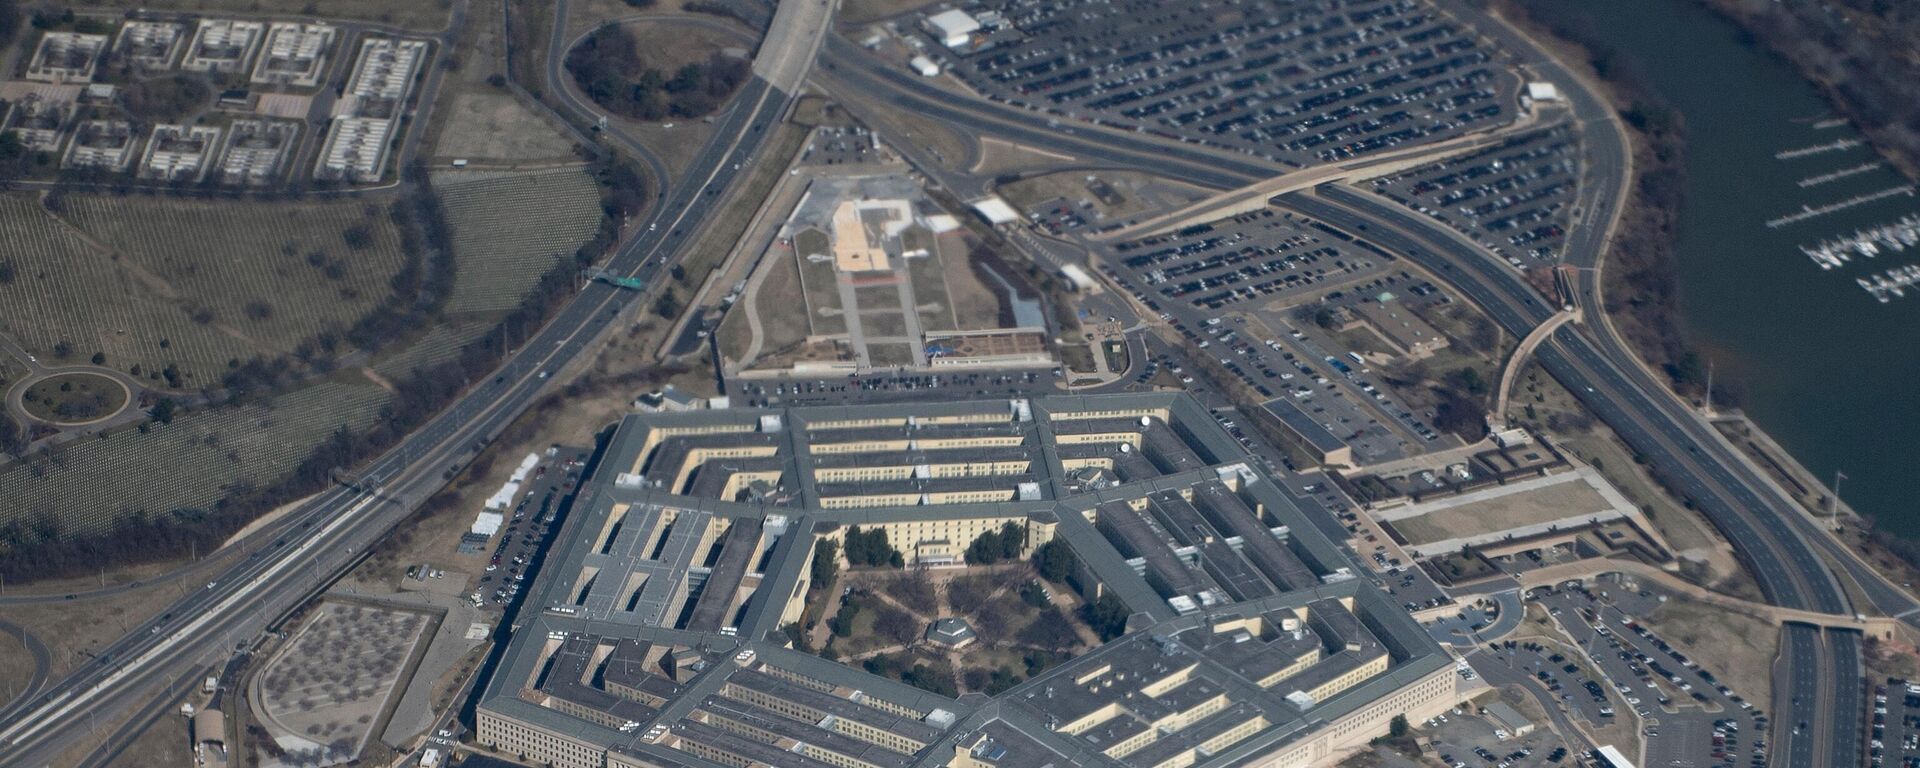 The Pentagon is seen from the air in Washington, DC, on March 2, 2022 - Sputnik International, 1920, 01.10.2023